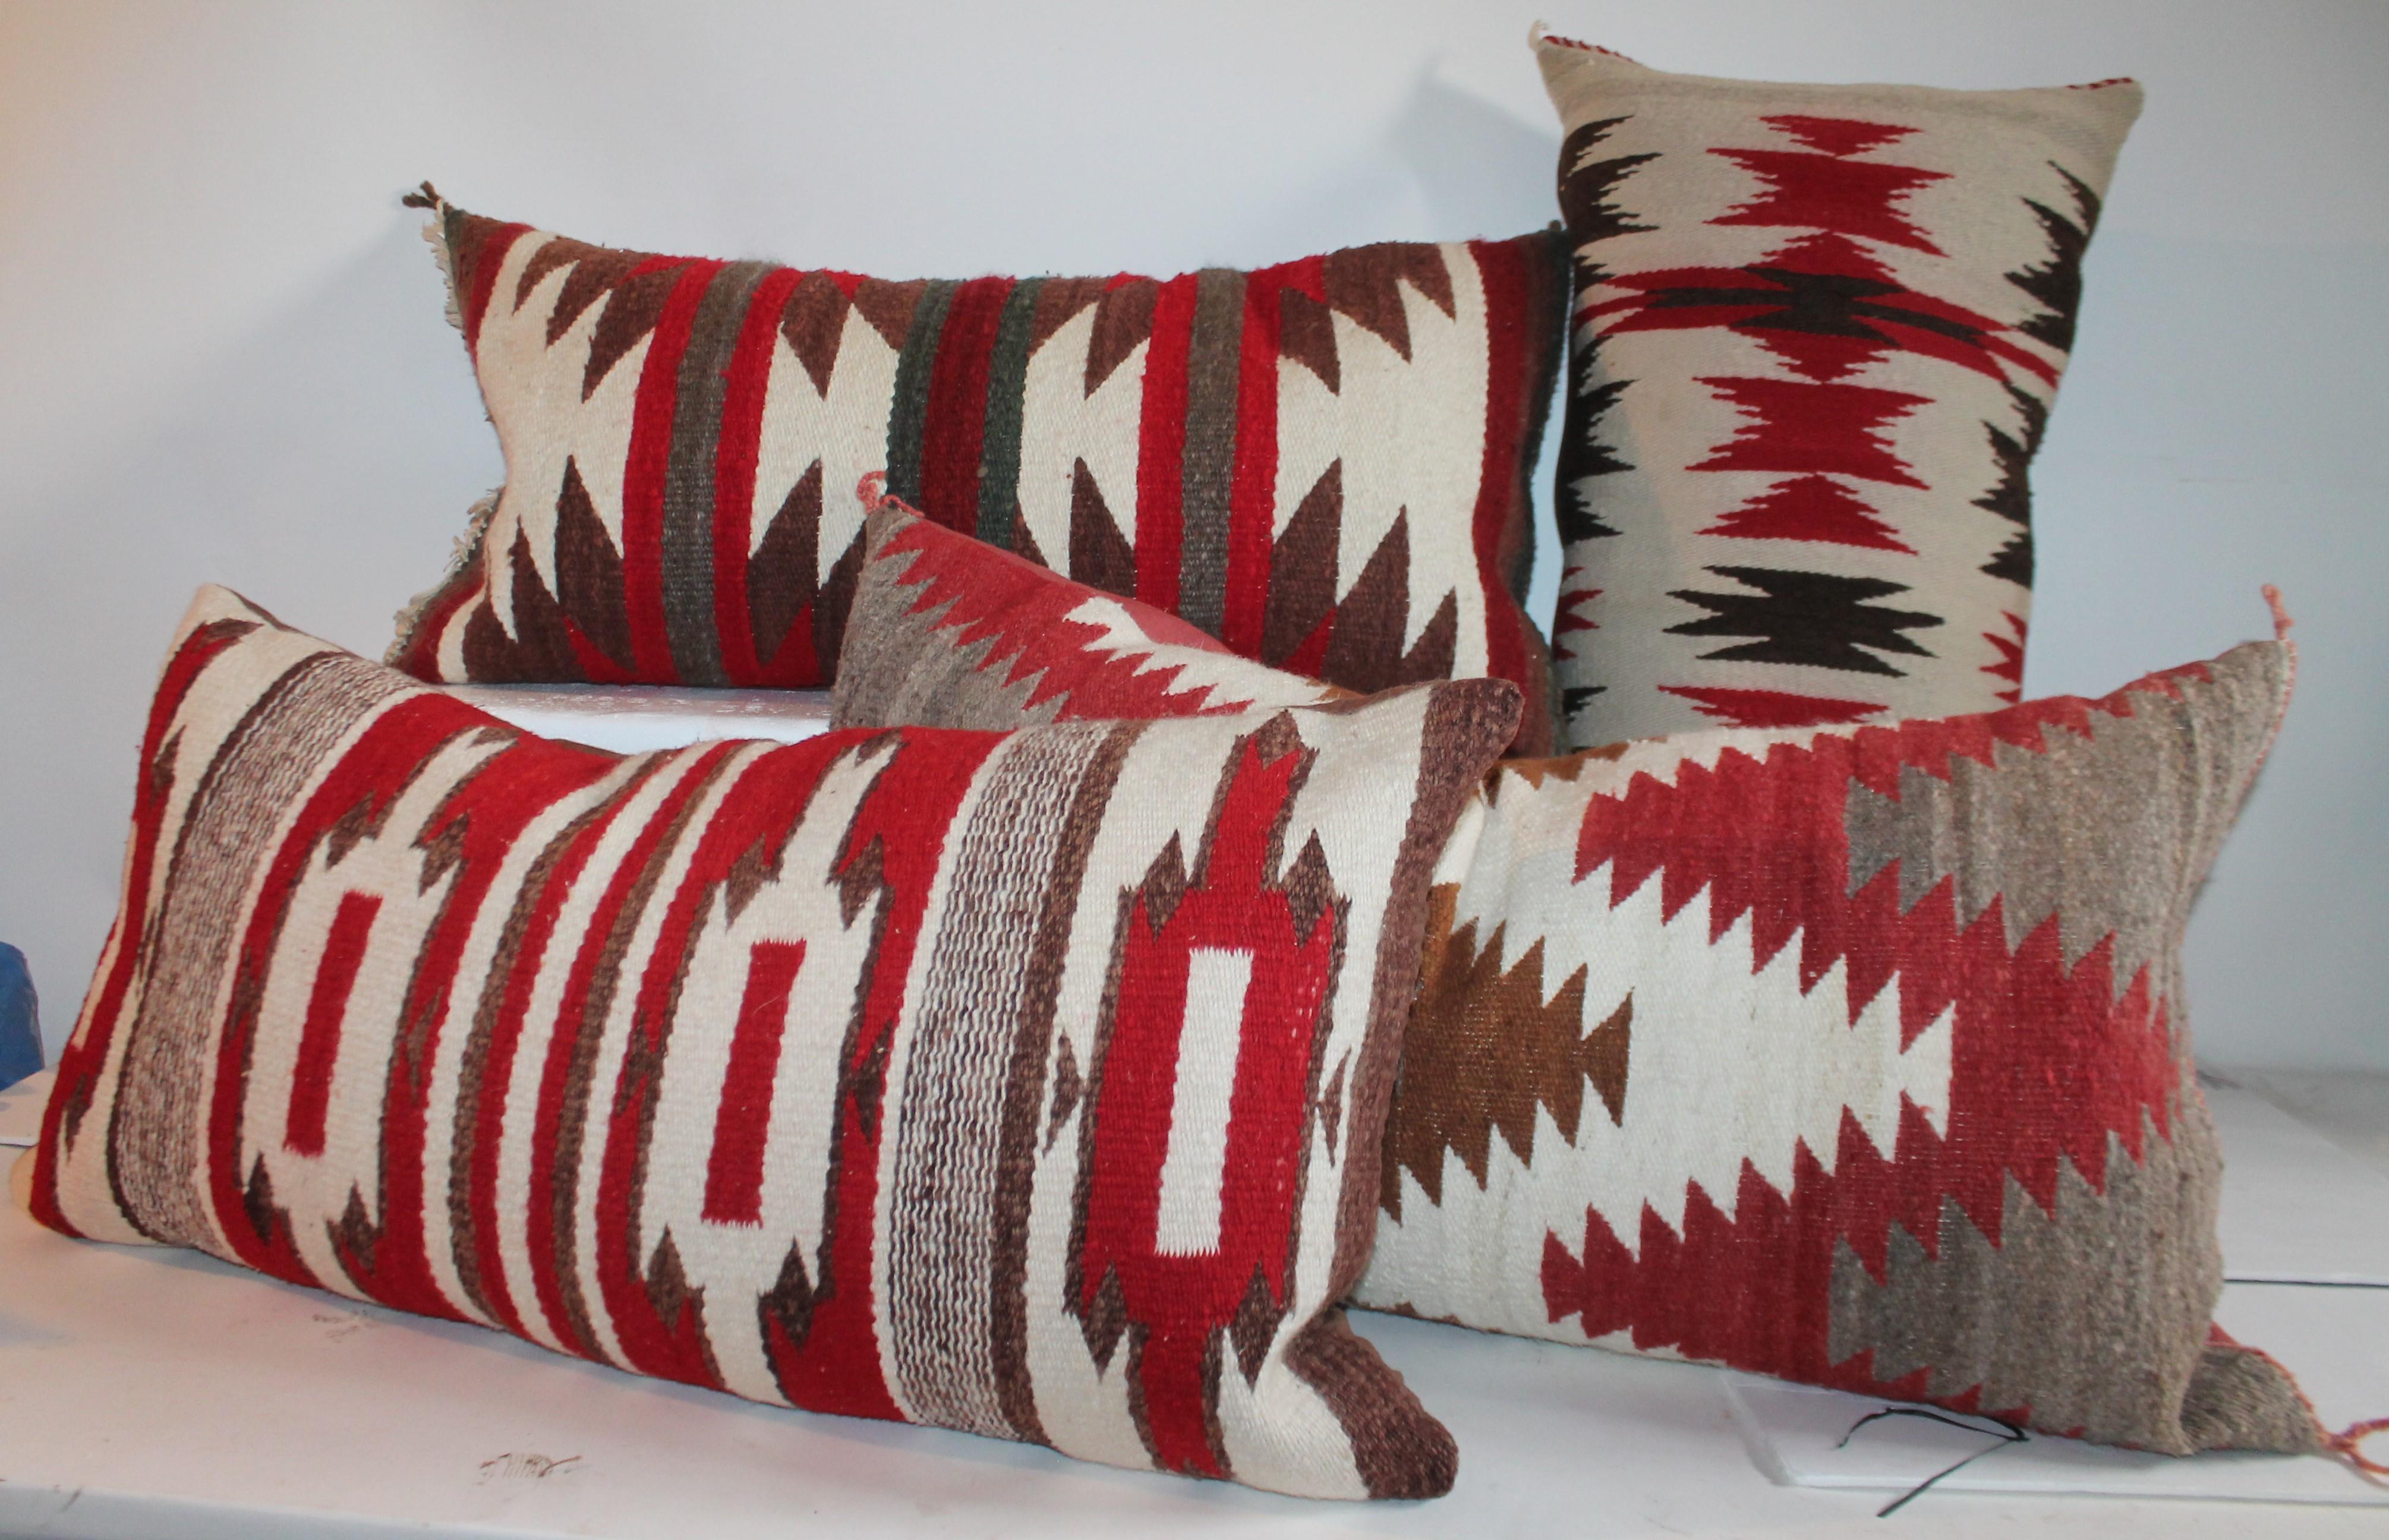 This collection of Navajo bolster pillows is hand selected for the beautiful colors and patterns showing a similar style. Each bolster is made from a different Navajo weaving / saddle blanket.
Sold as a collection of four.